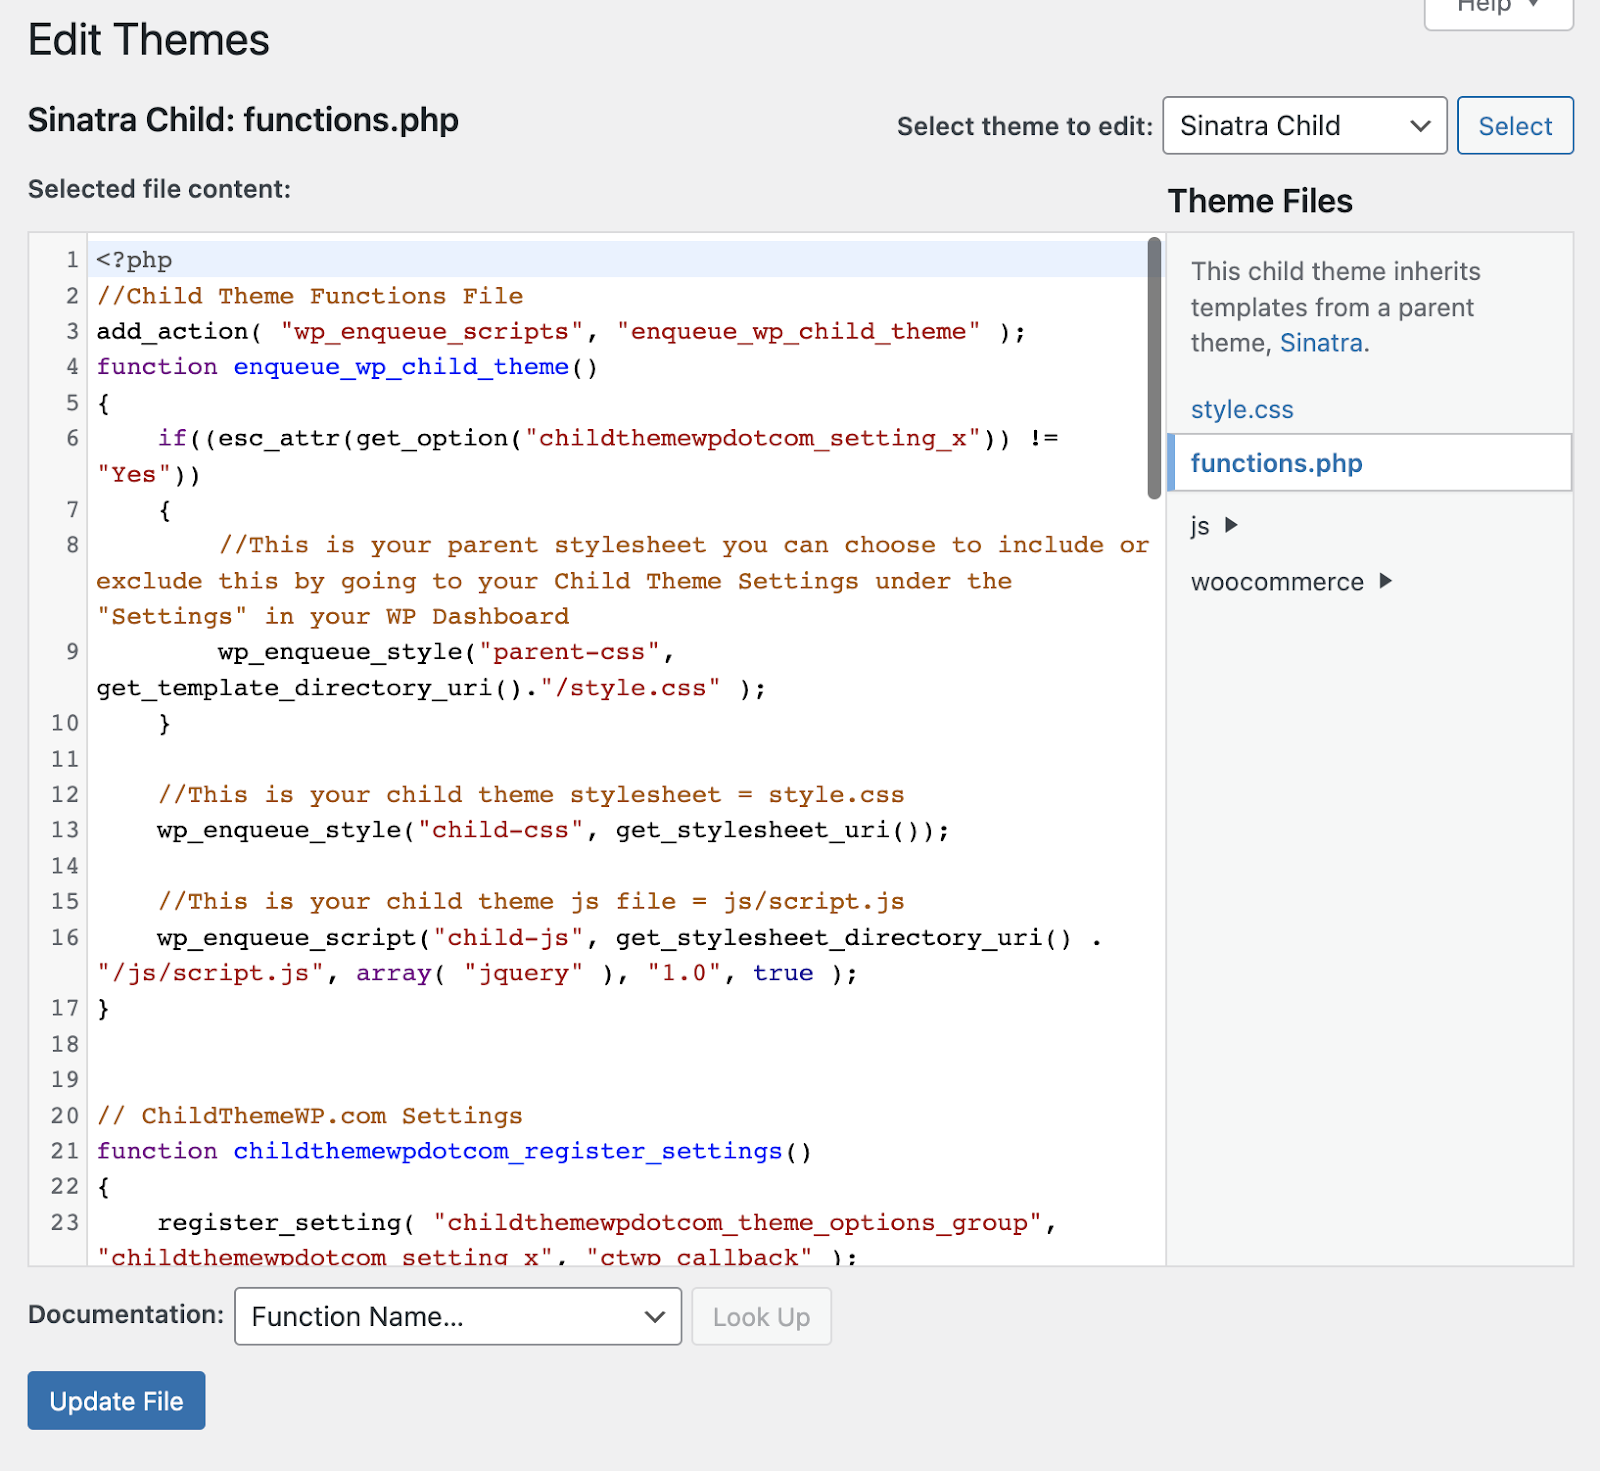 Editing the WordPress functions.php file in the theme file editor inside the wp-admin panel